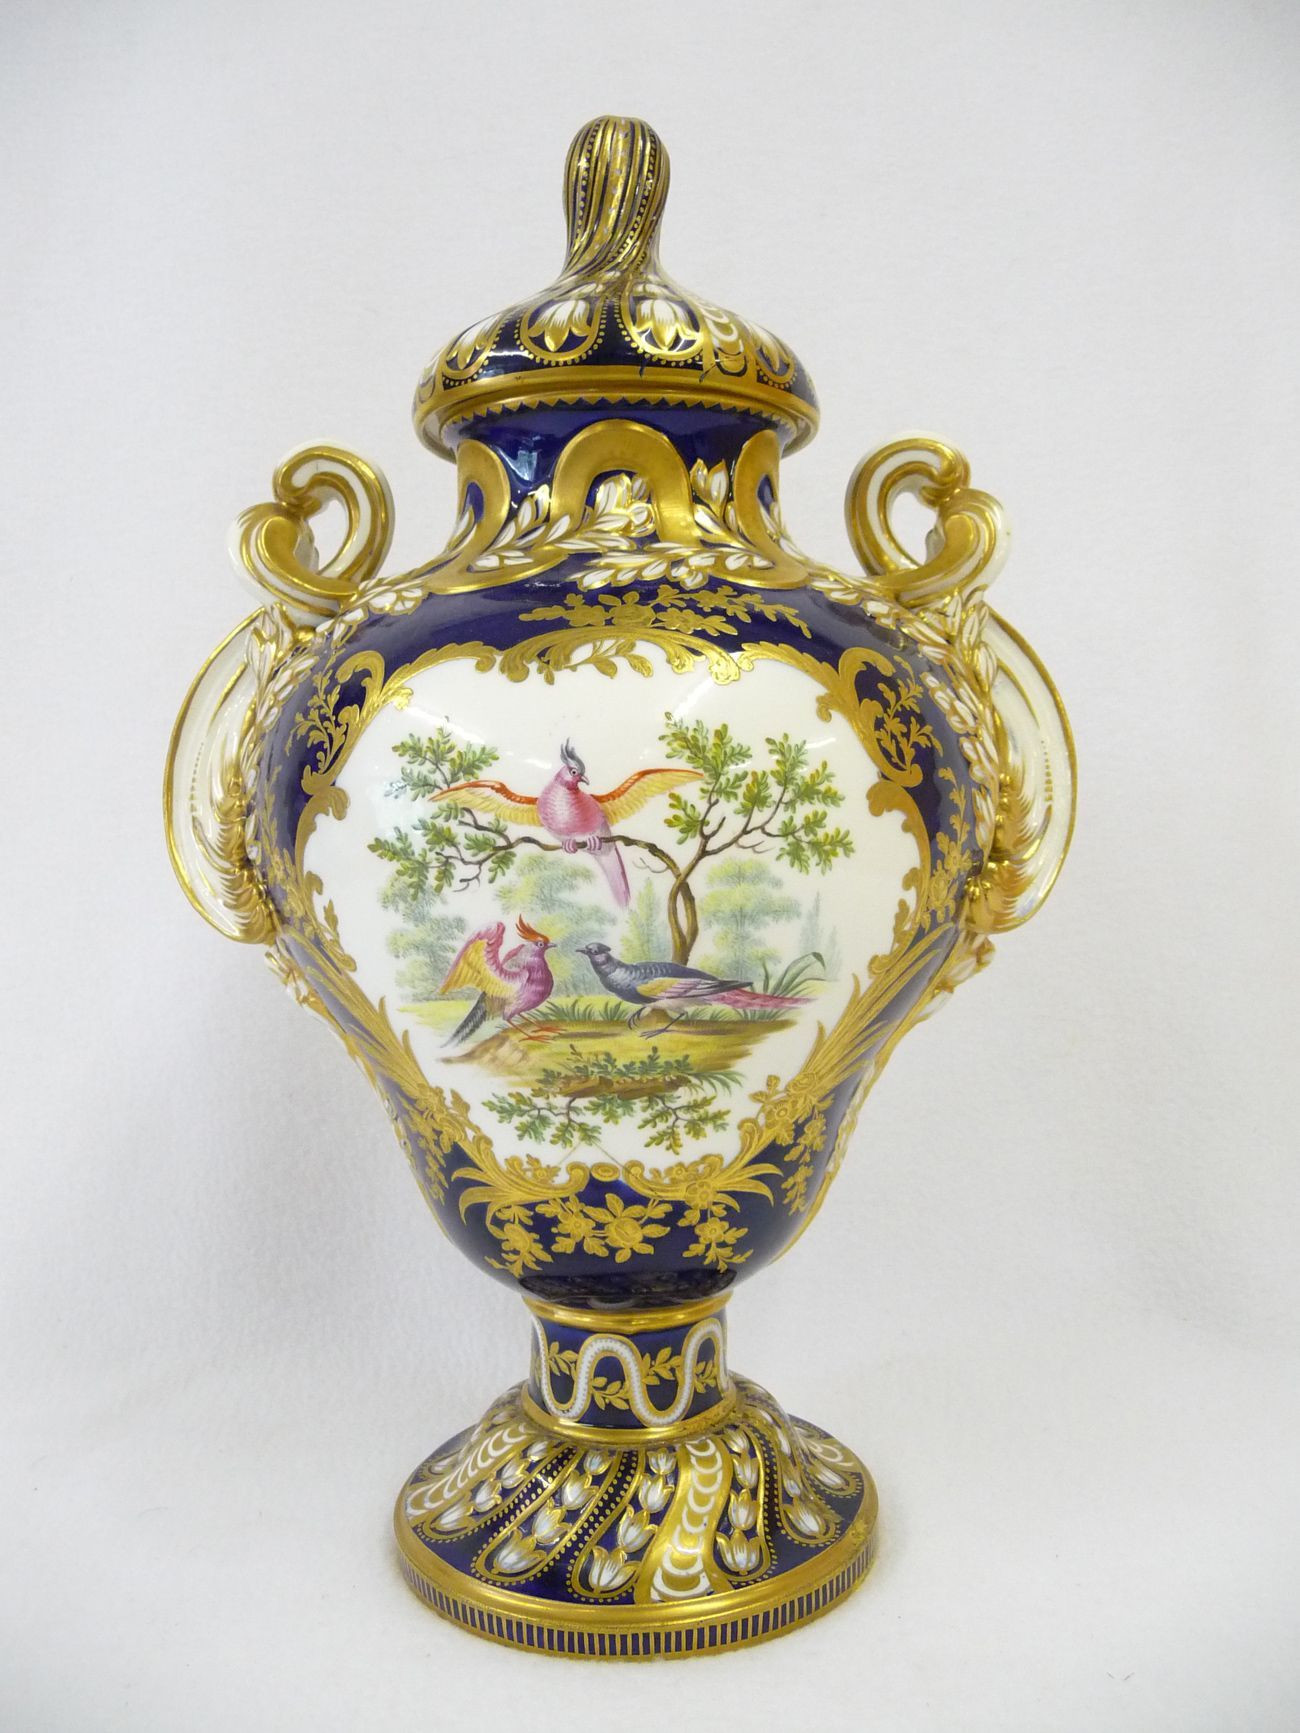 12 Popular Old Vases for Sale 2024 free download old vases for sale of 49 antique brass vase the weekly world throughout probably coalport porcelain pany shropshire england rococo